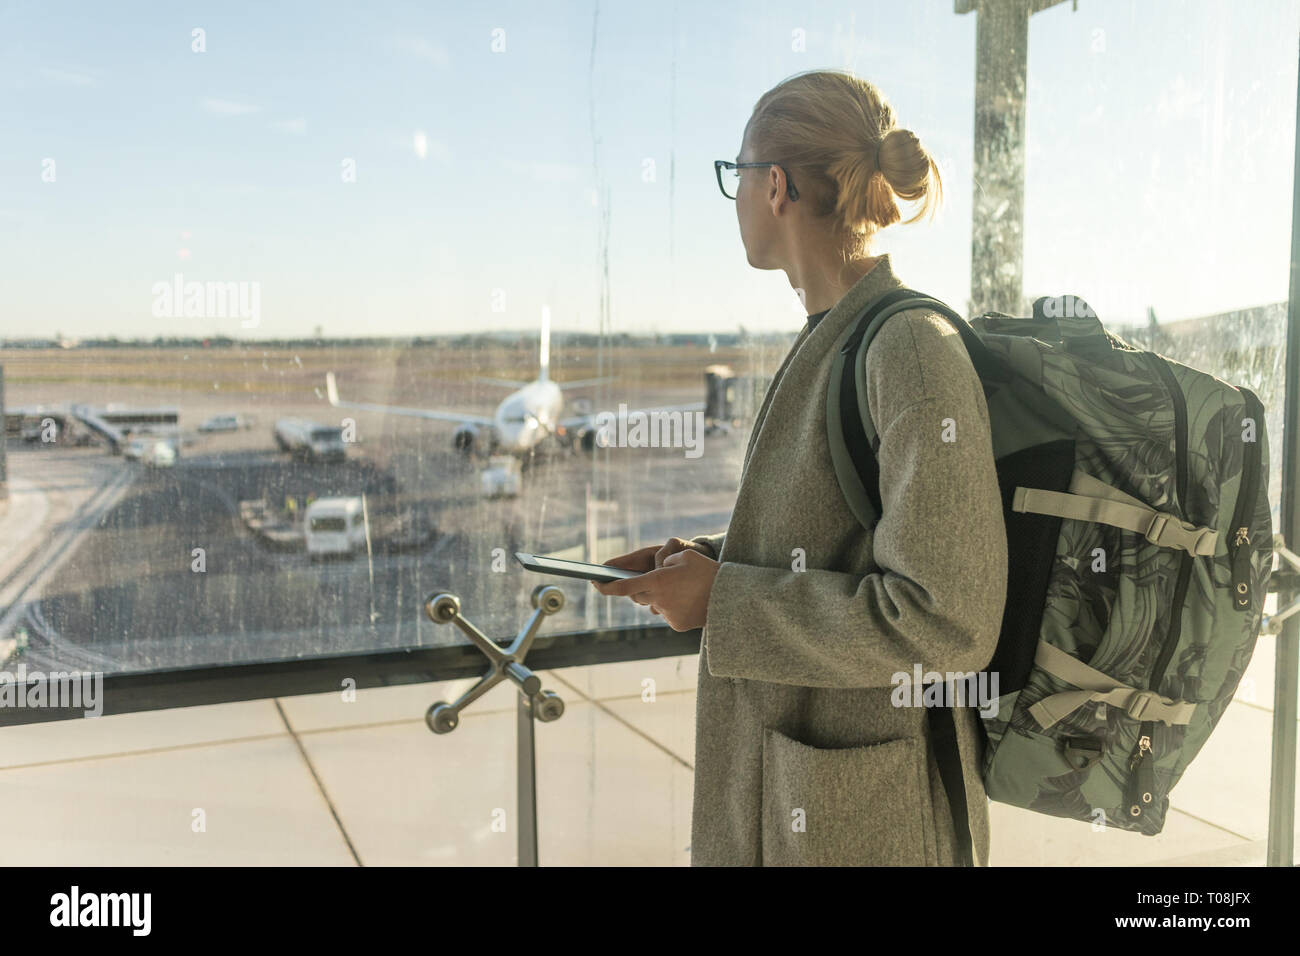 Casually dressed female traveler at airport, holding smart phone device, looking through the airport gate windows at planes on airport runway Stock Photo